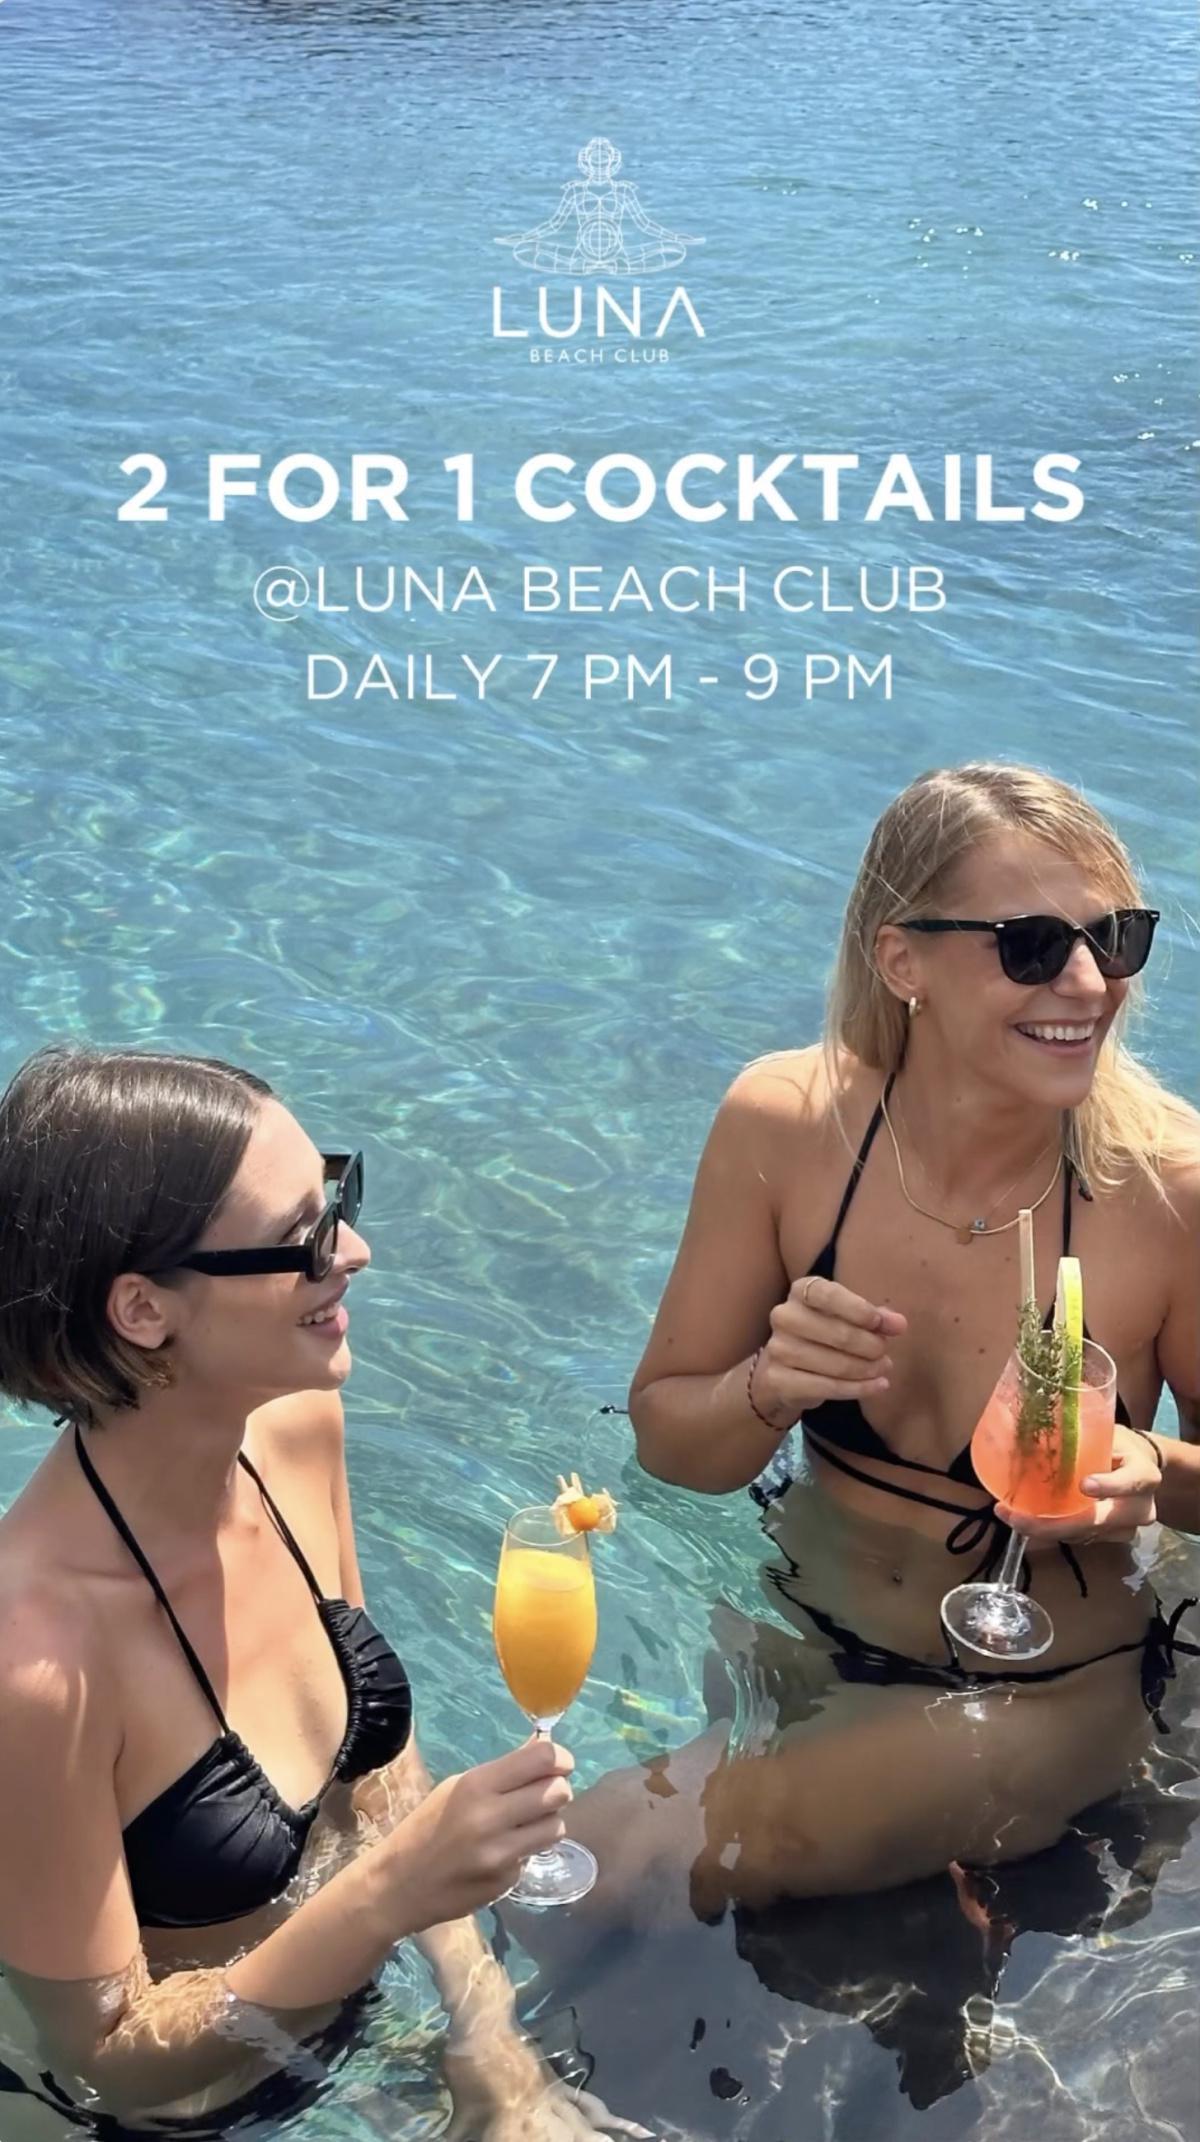 2 for 1 Cocktails at Luna Beach Club Every Day 7 -9pm